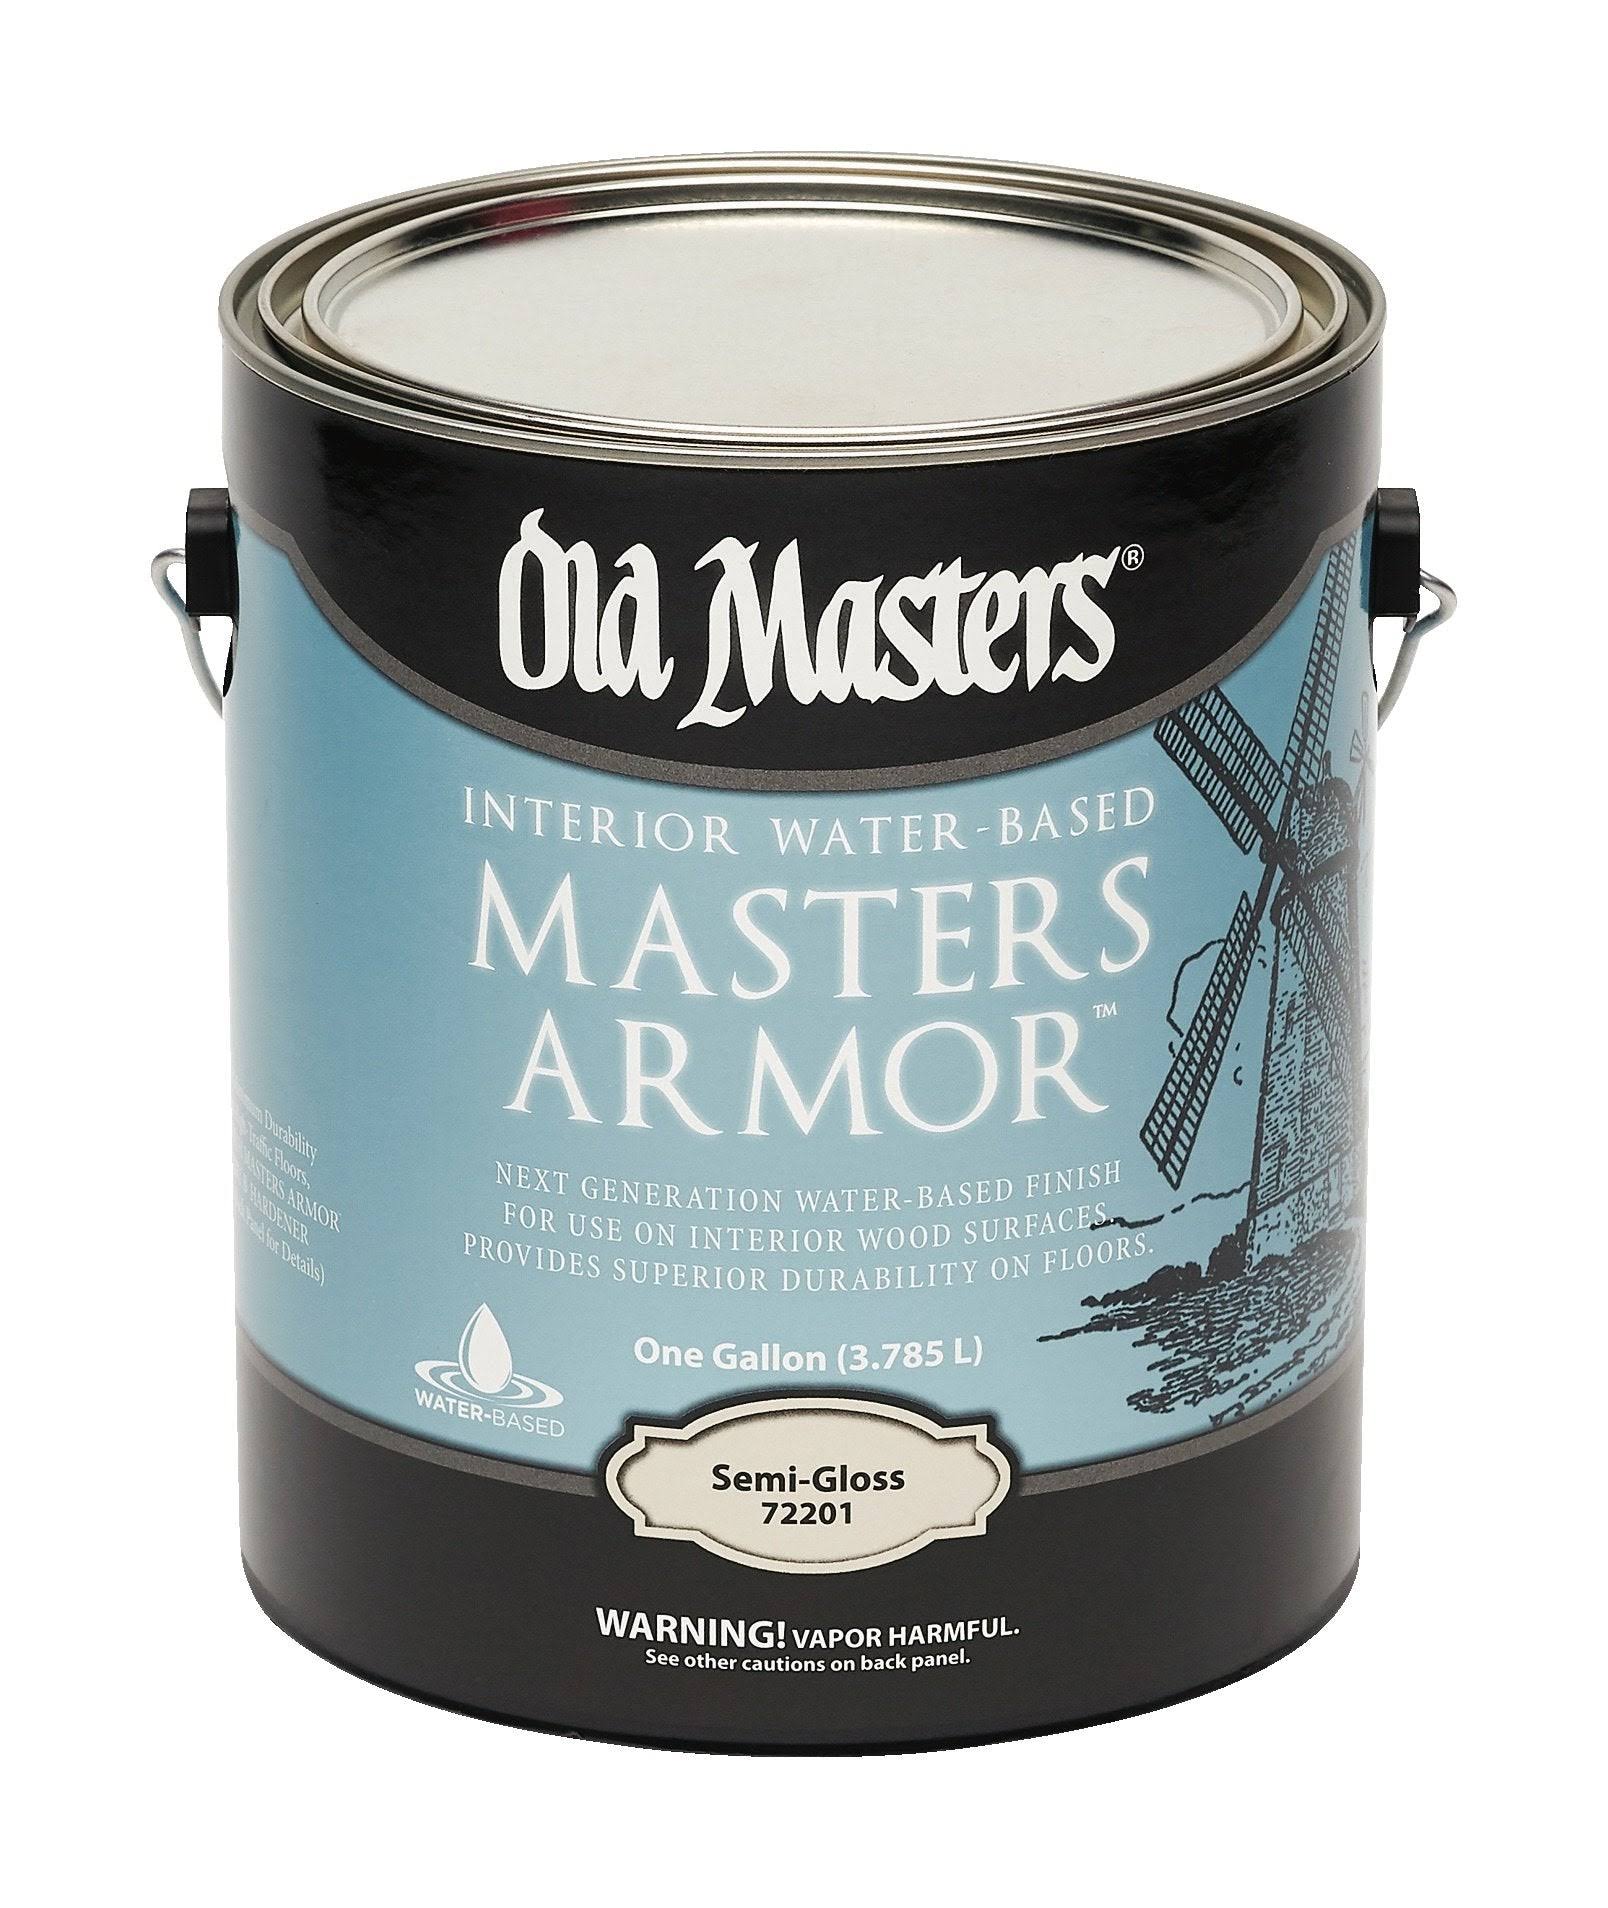 Old Masters 72201 Wood Stain, Semi-Gloss, 1 gal